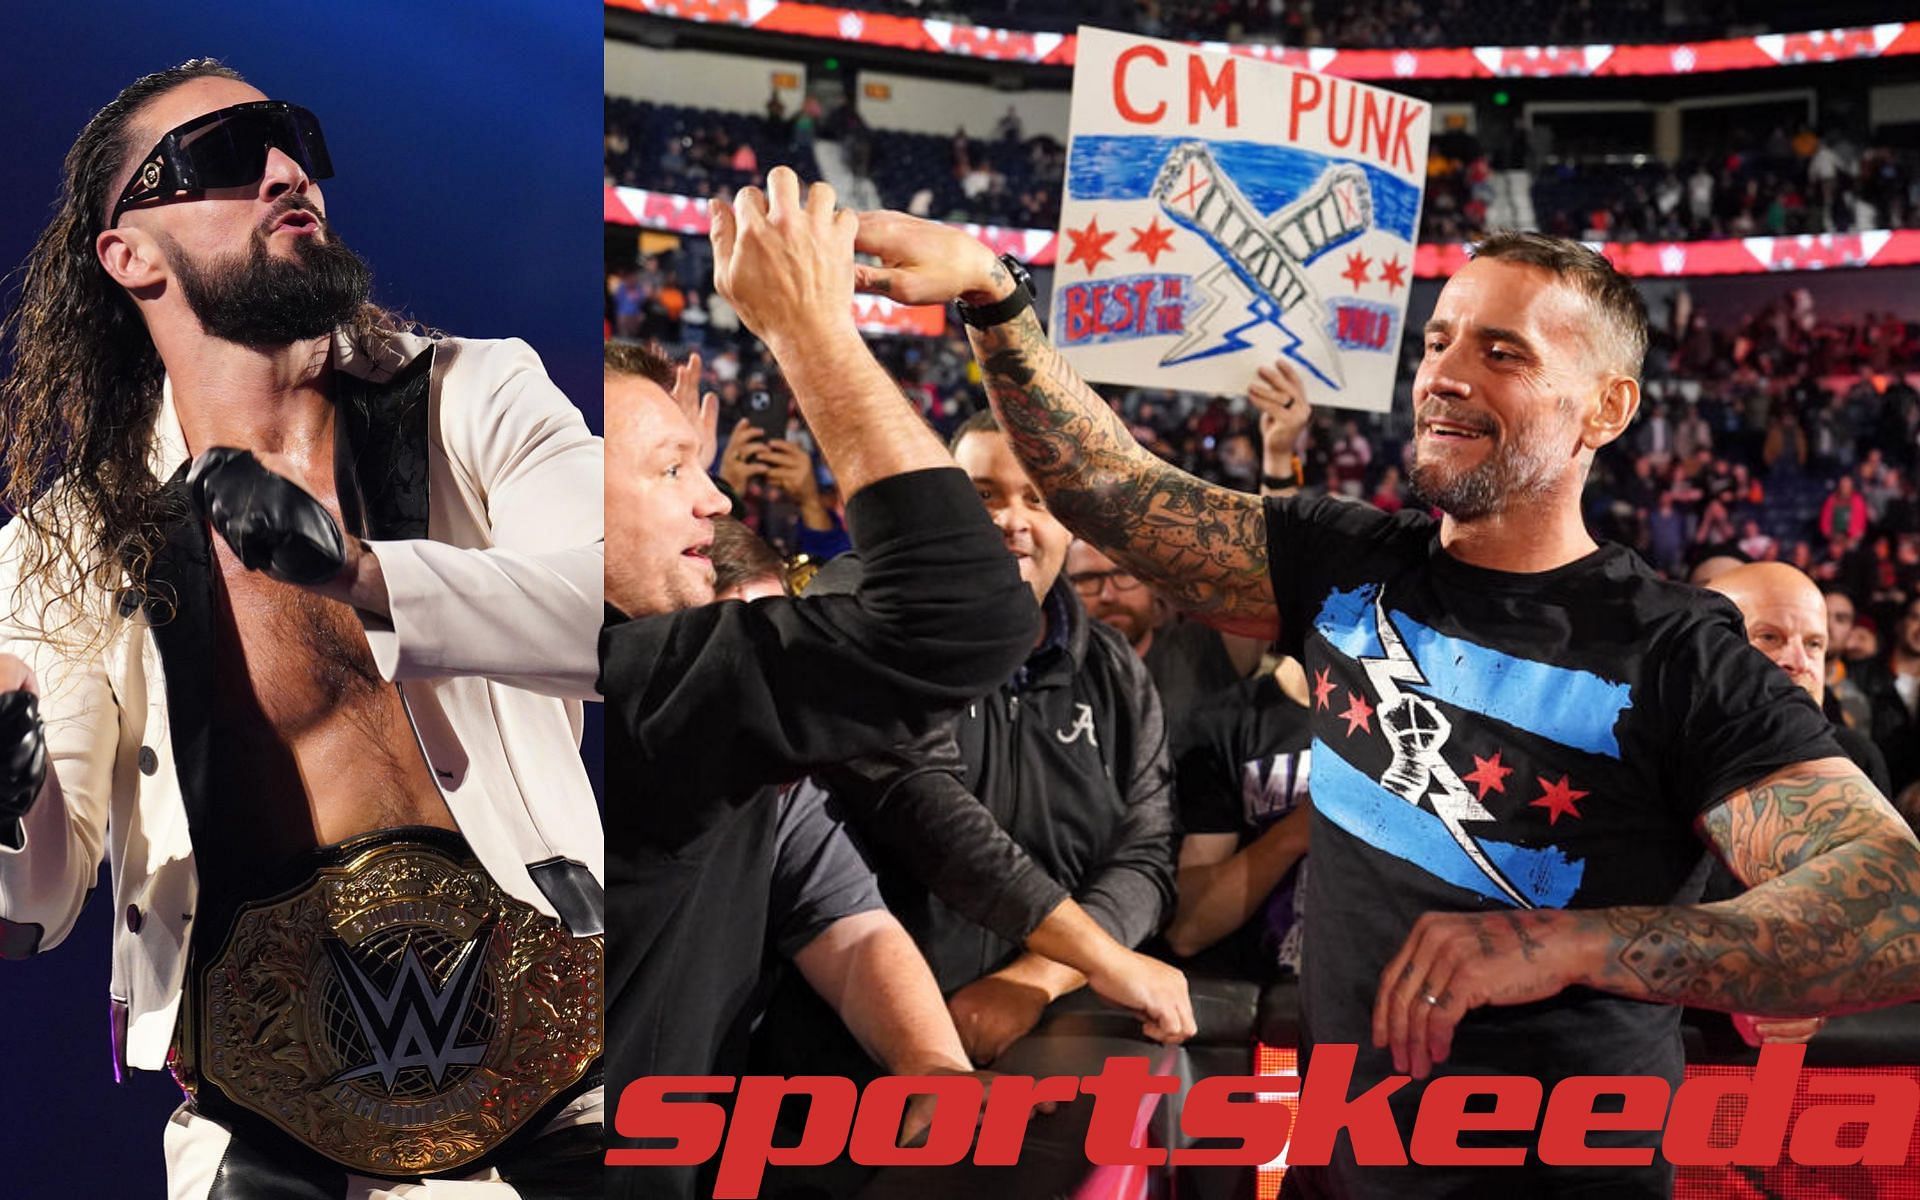 CM Punk versus Seth Rollins is a story that writes itself. 